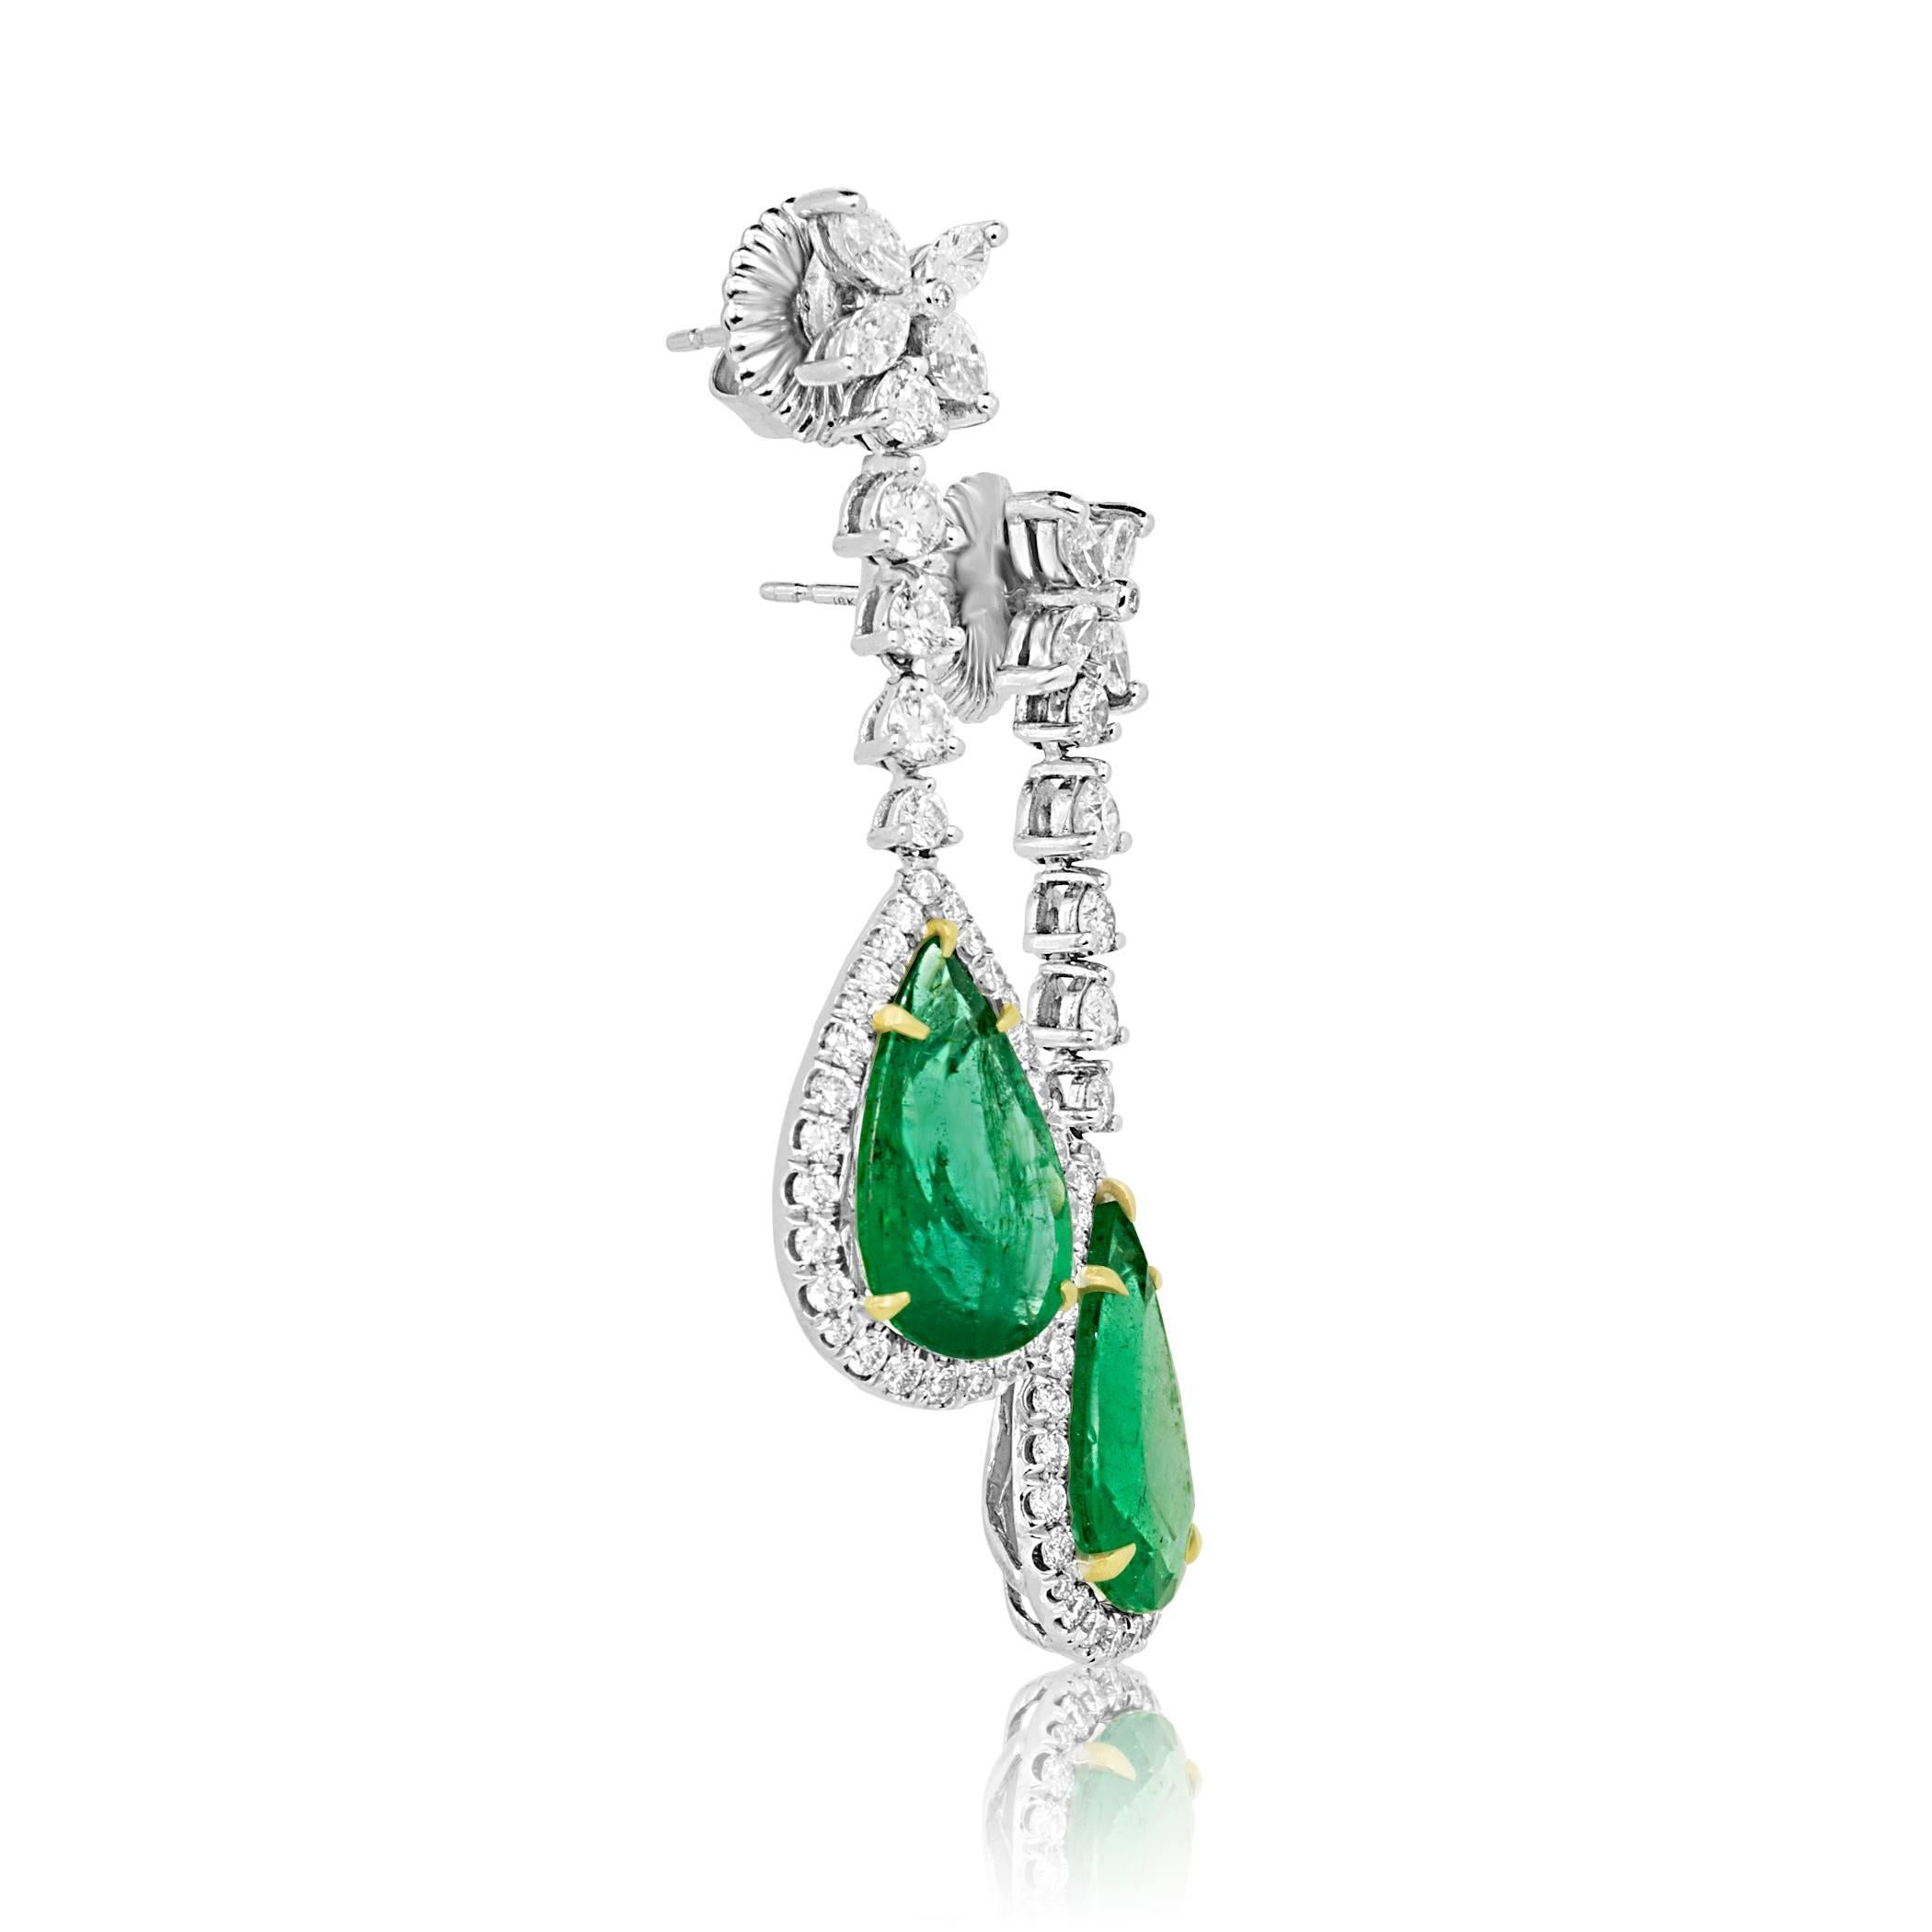 2 Pear Shape Emerald 9.02 Carat Encircled in Halo Of White Diamond 1.60 Carat and 8 Diamond Marquis 0.90 Carat in 18K White and Yellow Gold Dangle Drop Fashion Earring. 

Style available in different price ranges. Prices are based on your selection